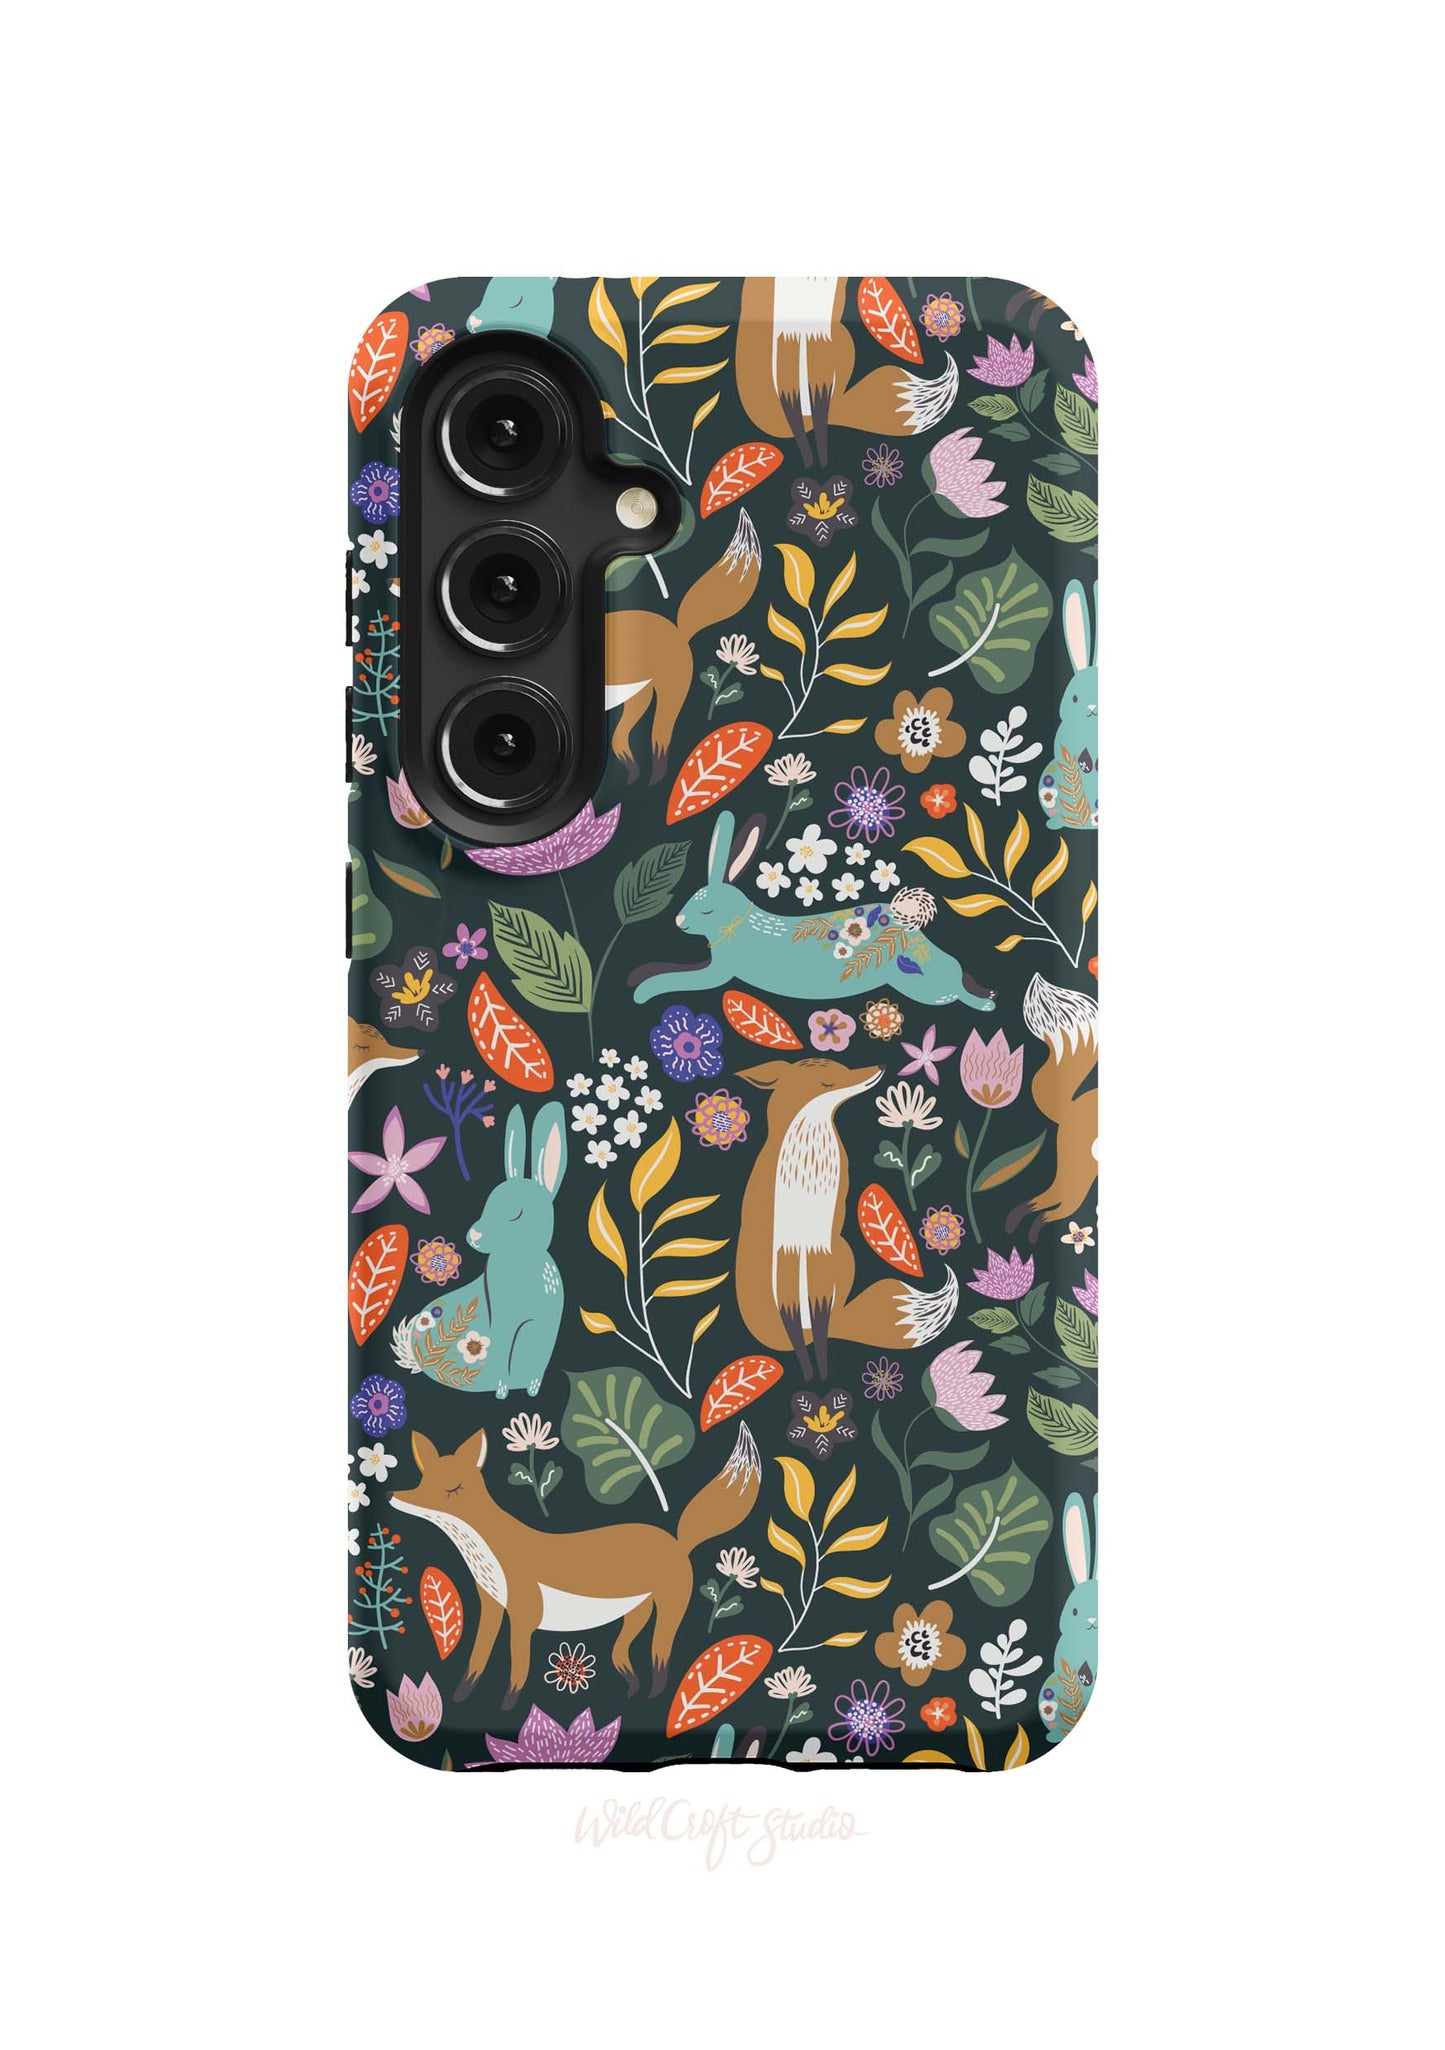 a phone case with a pattern of foxes and flowers